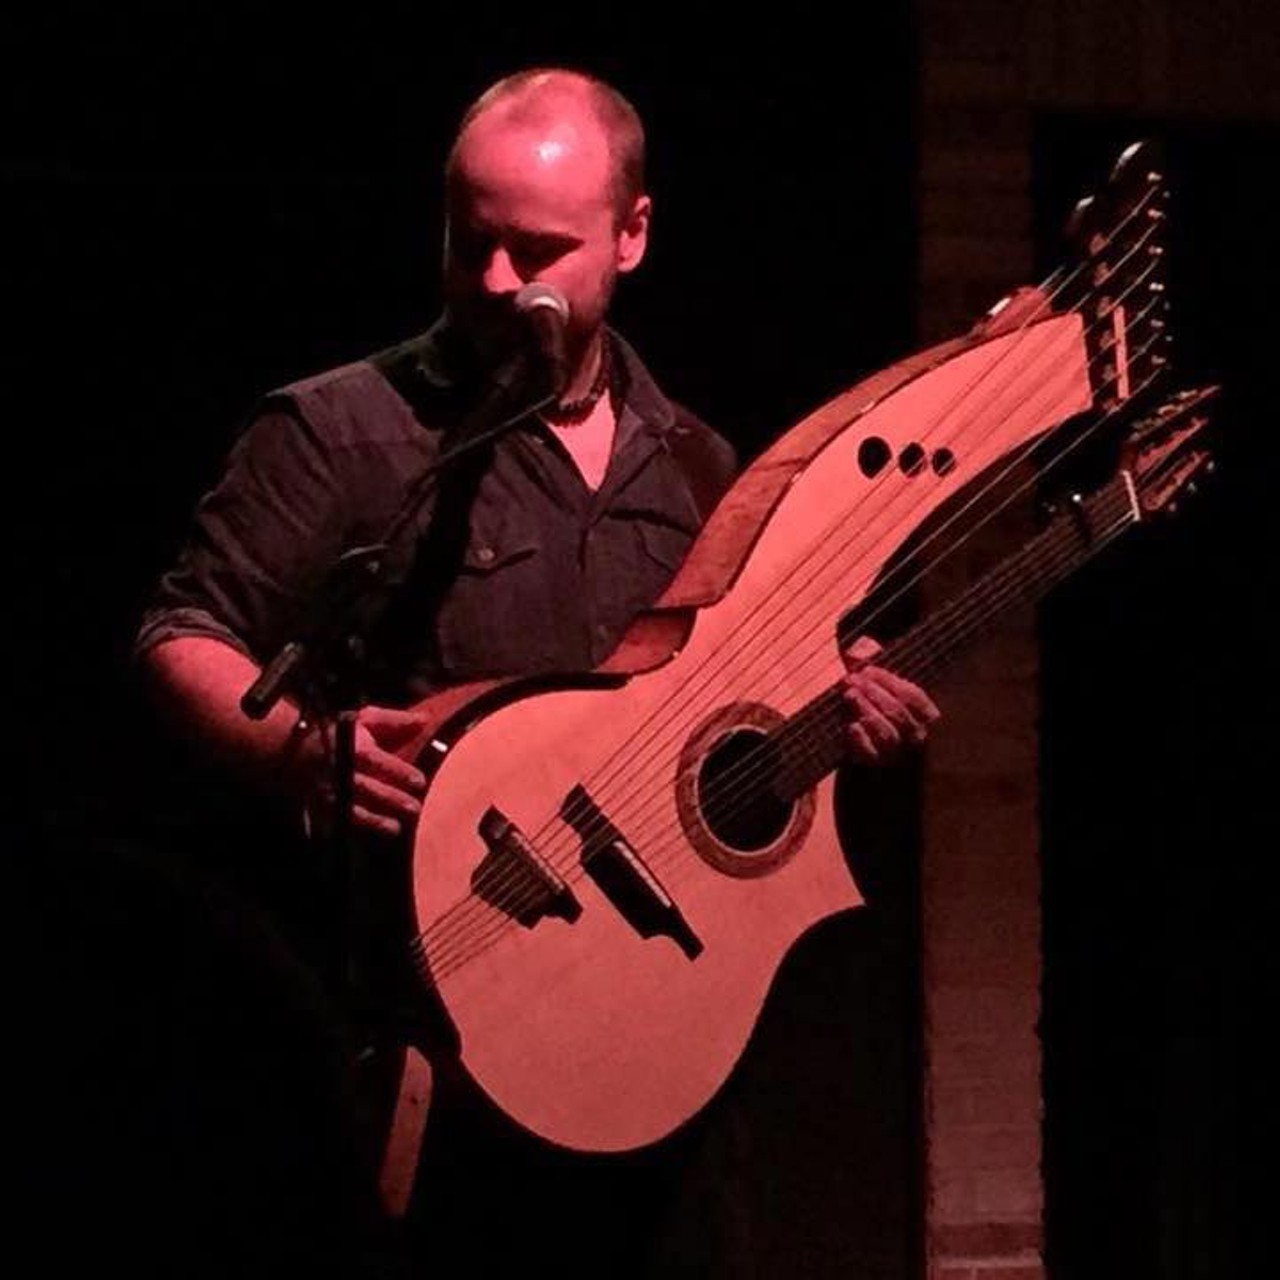 Thursday, 8/25
Andy McKee 
@ The Ark
Remember that dude playing those ridiculous-looking guitars on YouTube? That&#146;s this guy. Popular for his amazing technical capabilities and creative use of altered tunings, tapping, percussive hits, and the ability to look really sad while playing amazing music, he at one point held the top three positions on YouTube&#146;s list of top-rated videos of all time. A master craftsman and innovator, Andy McKee is truly a virtuoso of our time.
Doors at 8 p.m.; 316 S. Main St., Ann Arbor; theark.org; $15.